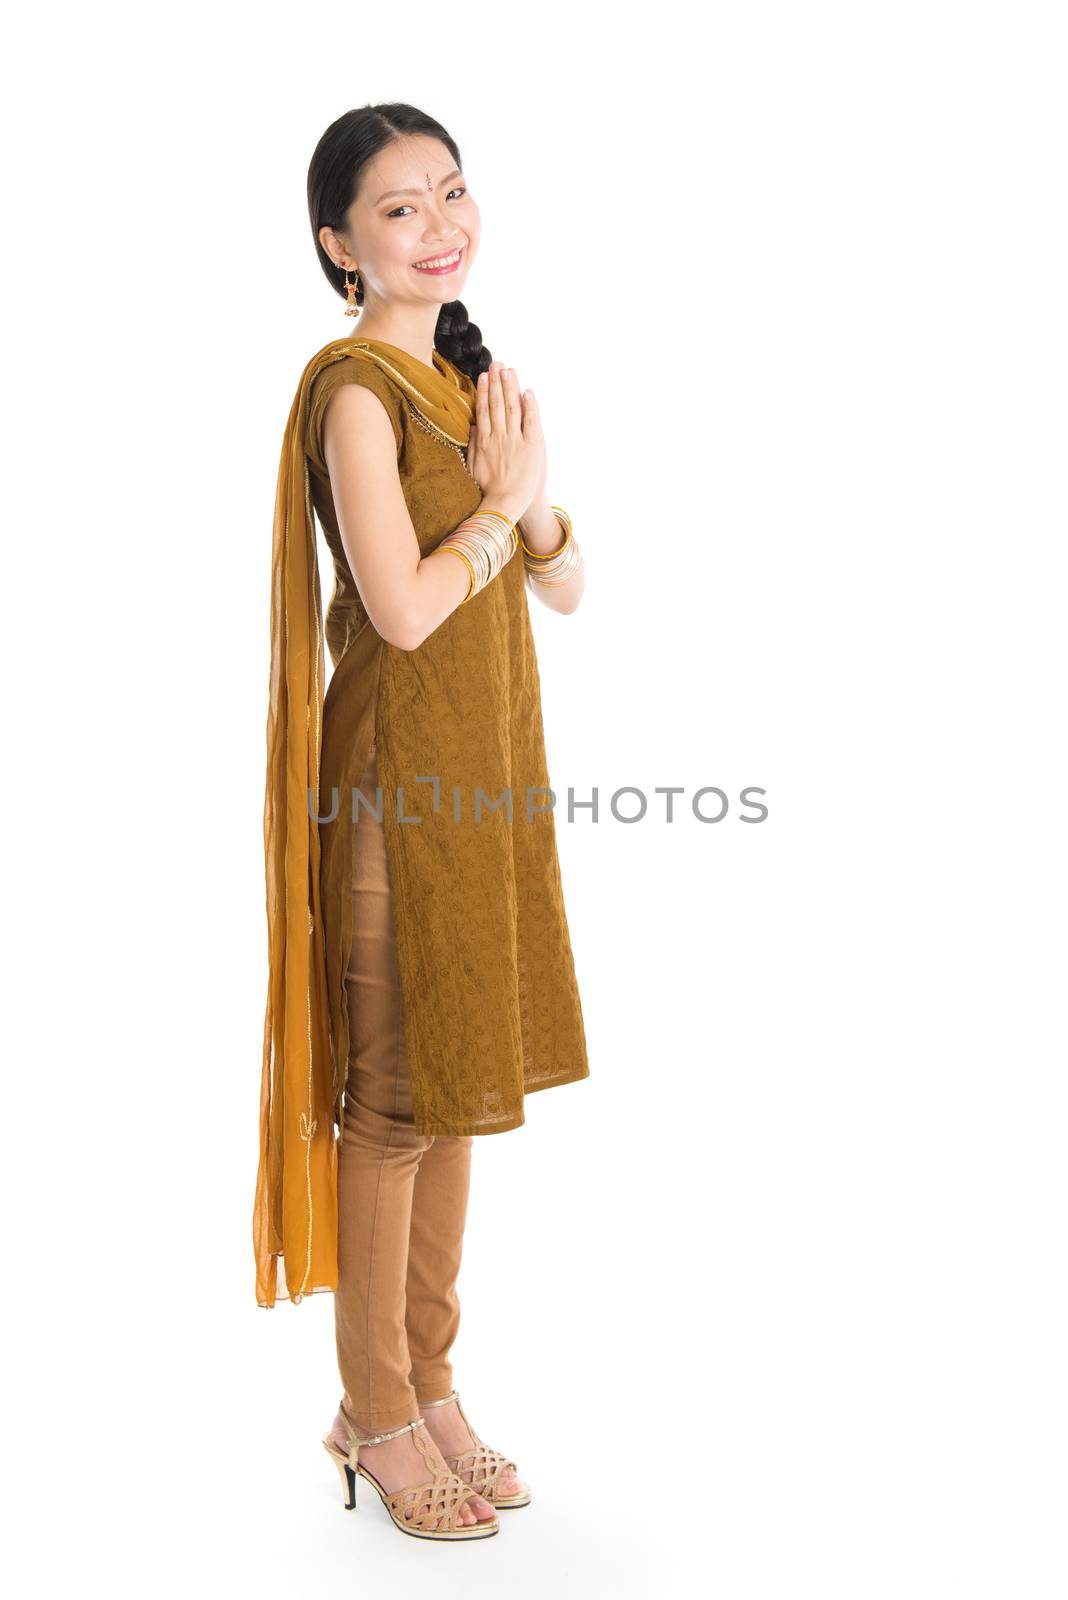 Young mixed race Indian Chinese girl in traditional punjabi dress greeting, full length standing isolated on white background.